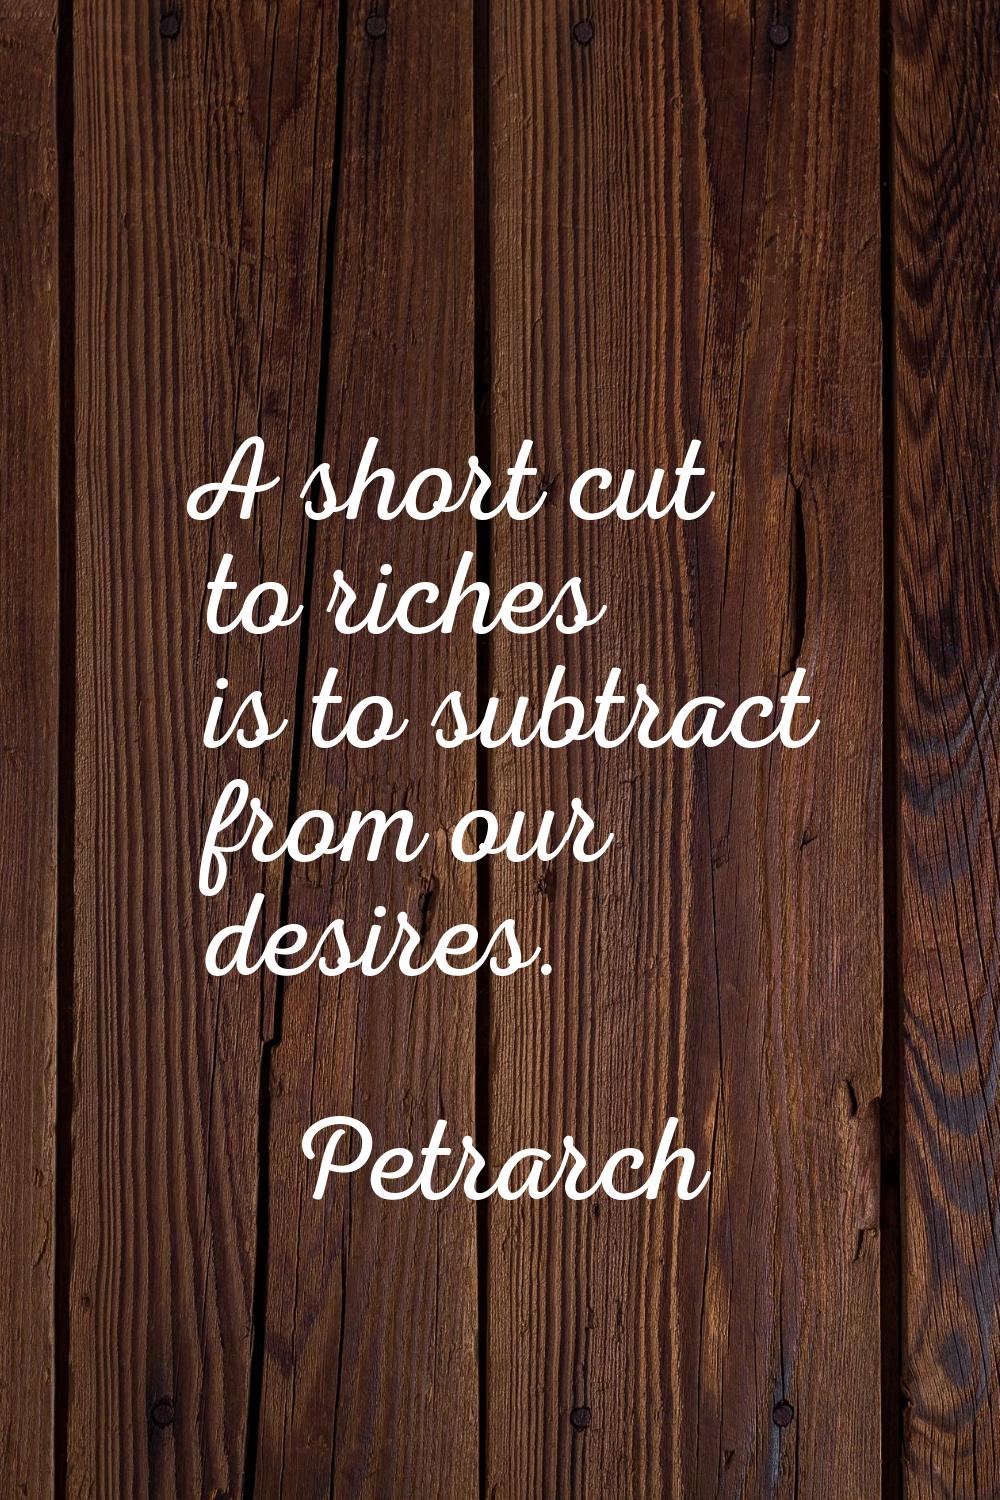 A short cut to riches is to subtract from our desires.